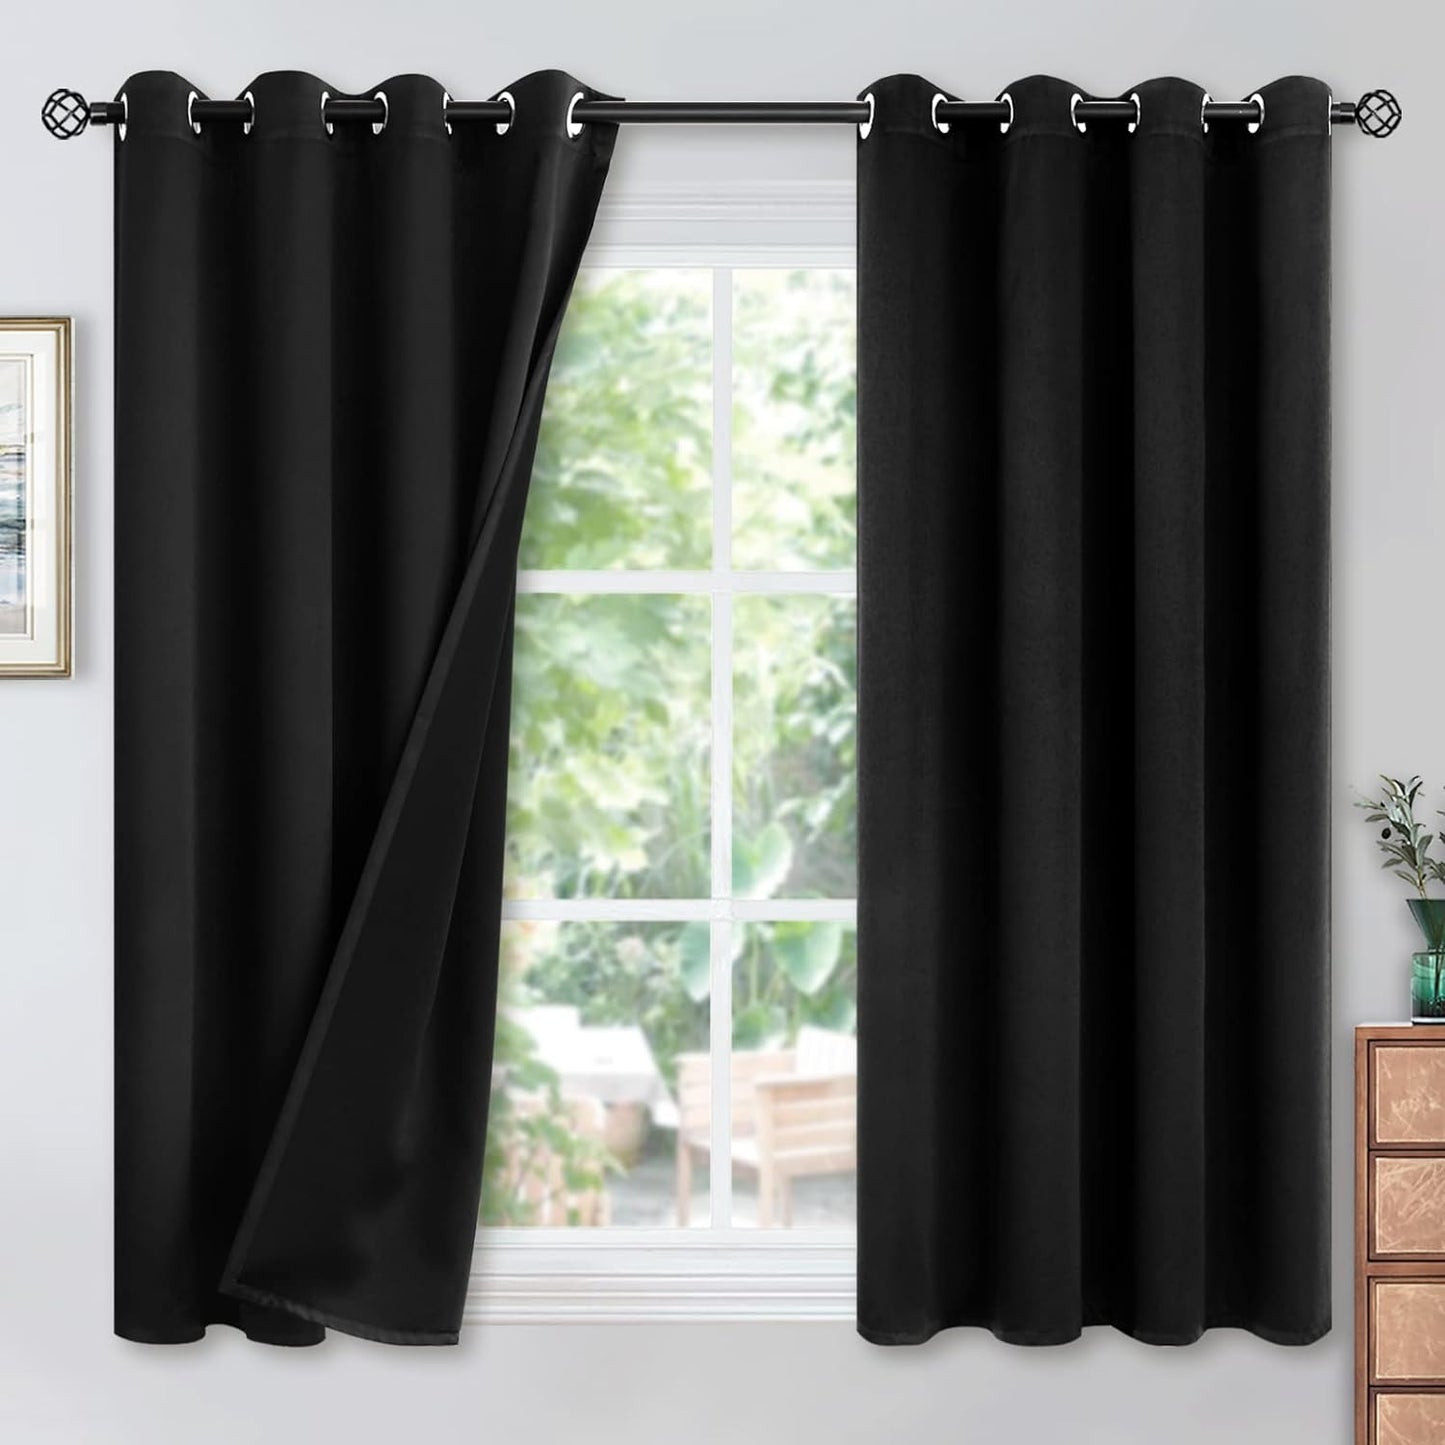 Youngstex Black 100% Blackout Curtains 63 Inches for Bedroom Thermal Insulated Total Room Darkening Curtains for Living Room Window with Black Back Grommet, 2 Panels, 42 X 63 Inch  YoungsTex Black 52W X 54L 